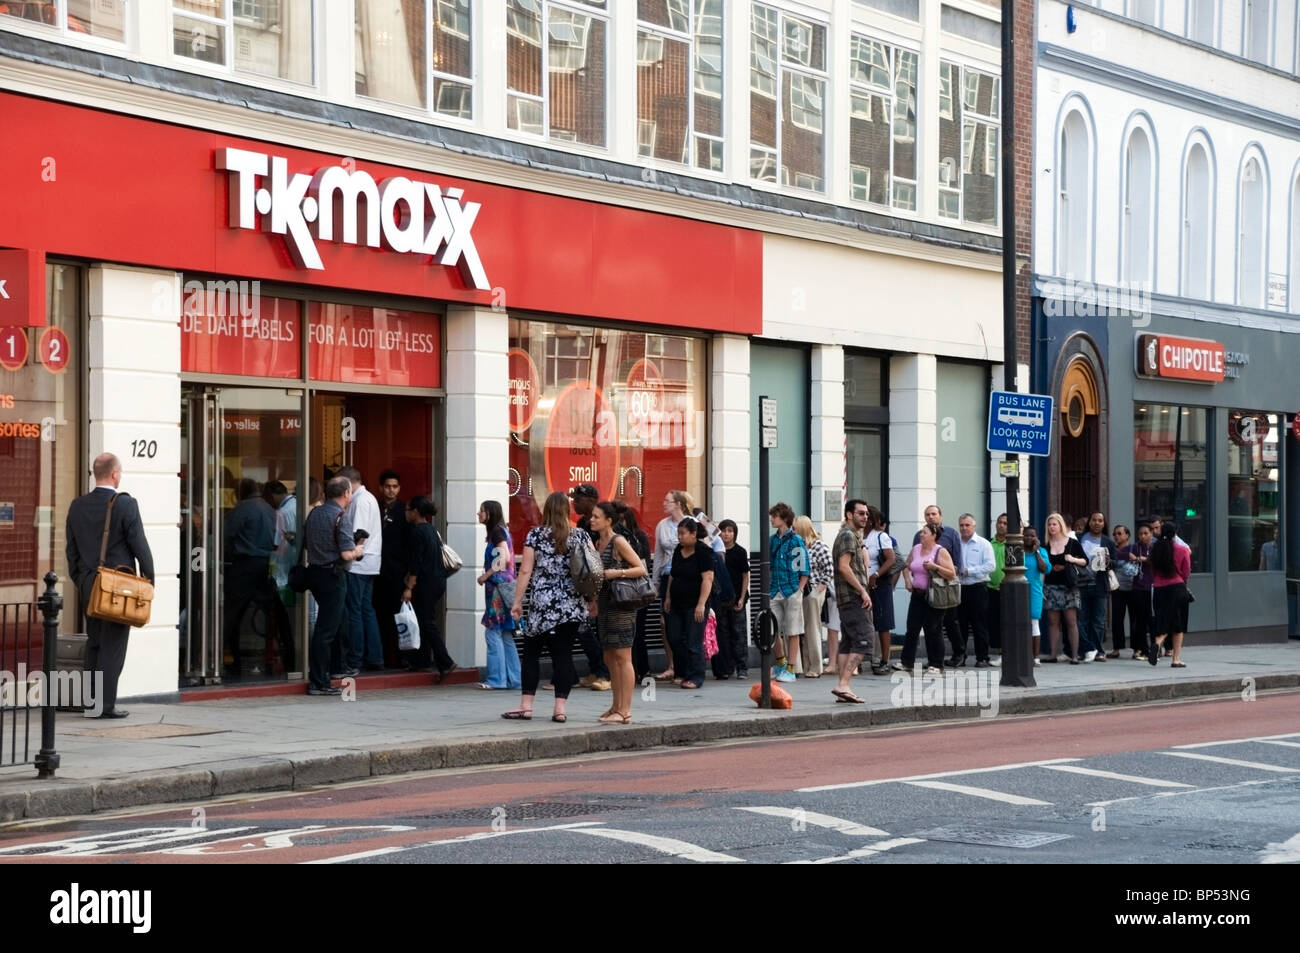 T.K. Maxx, new store opening with queue of people at Charring Cross Road, London, England, UK, Europe, EU Stock Photo